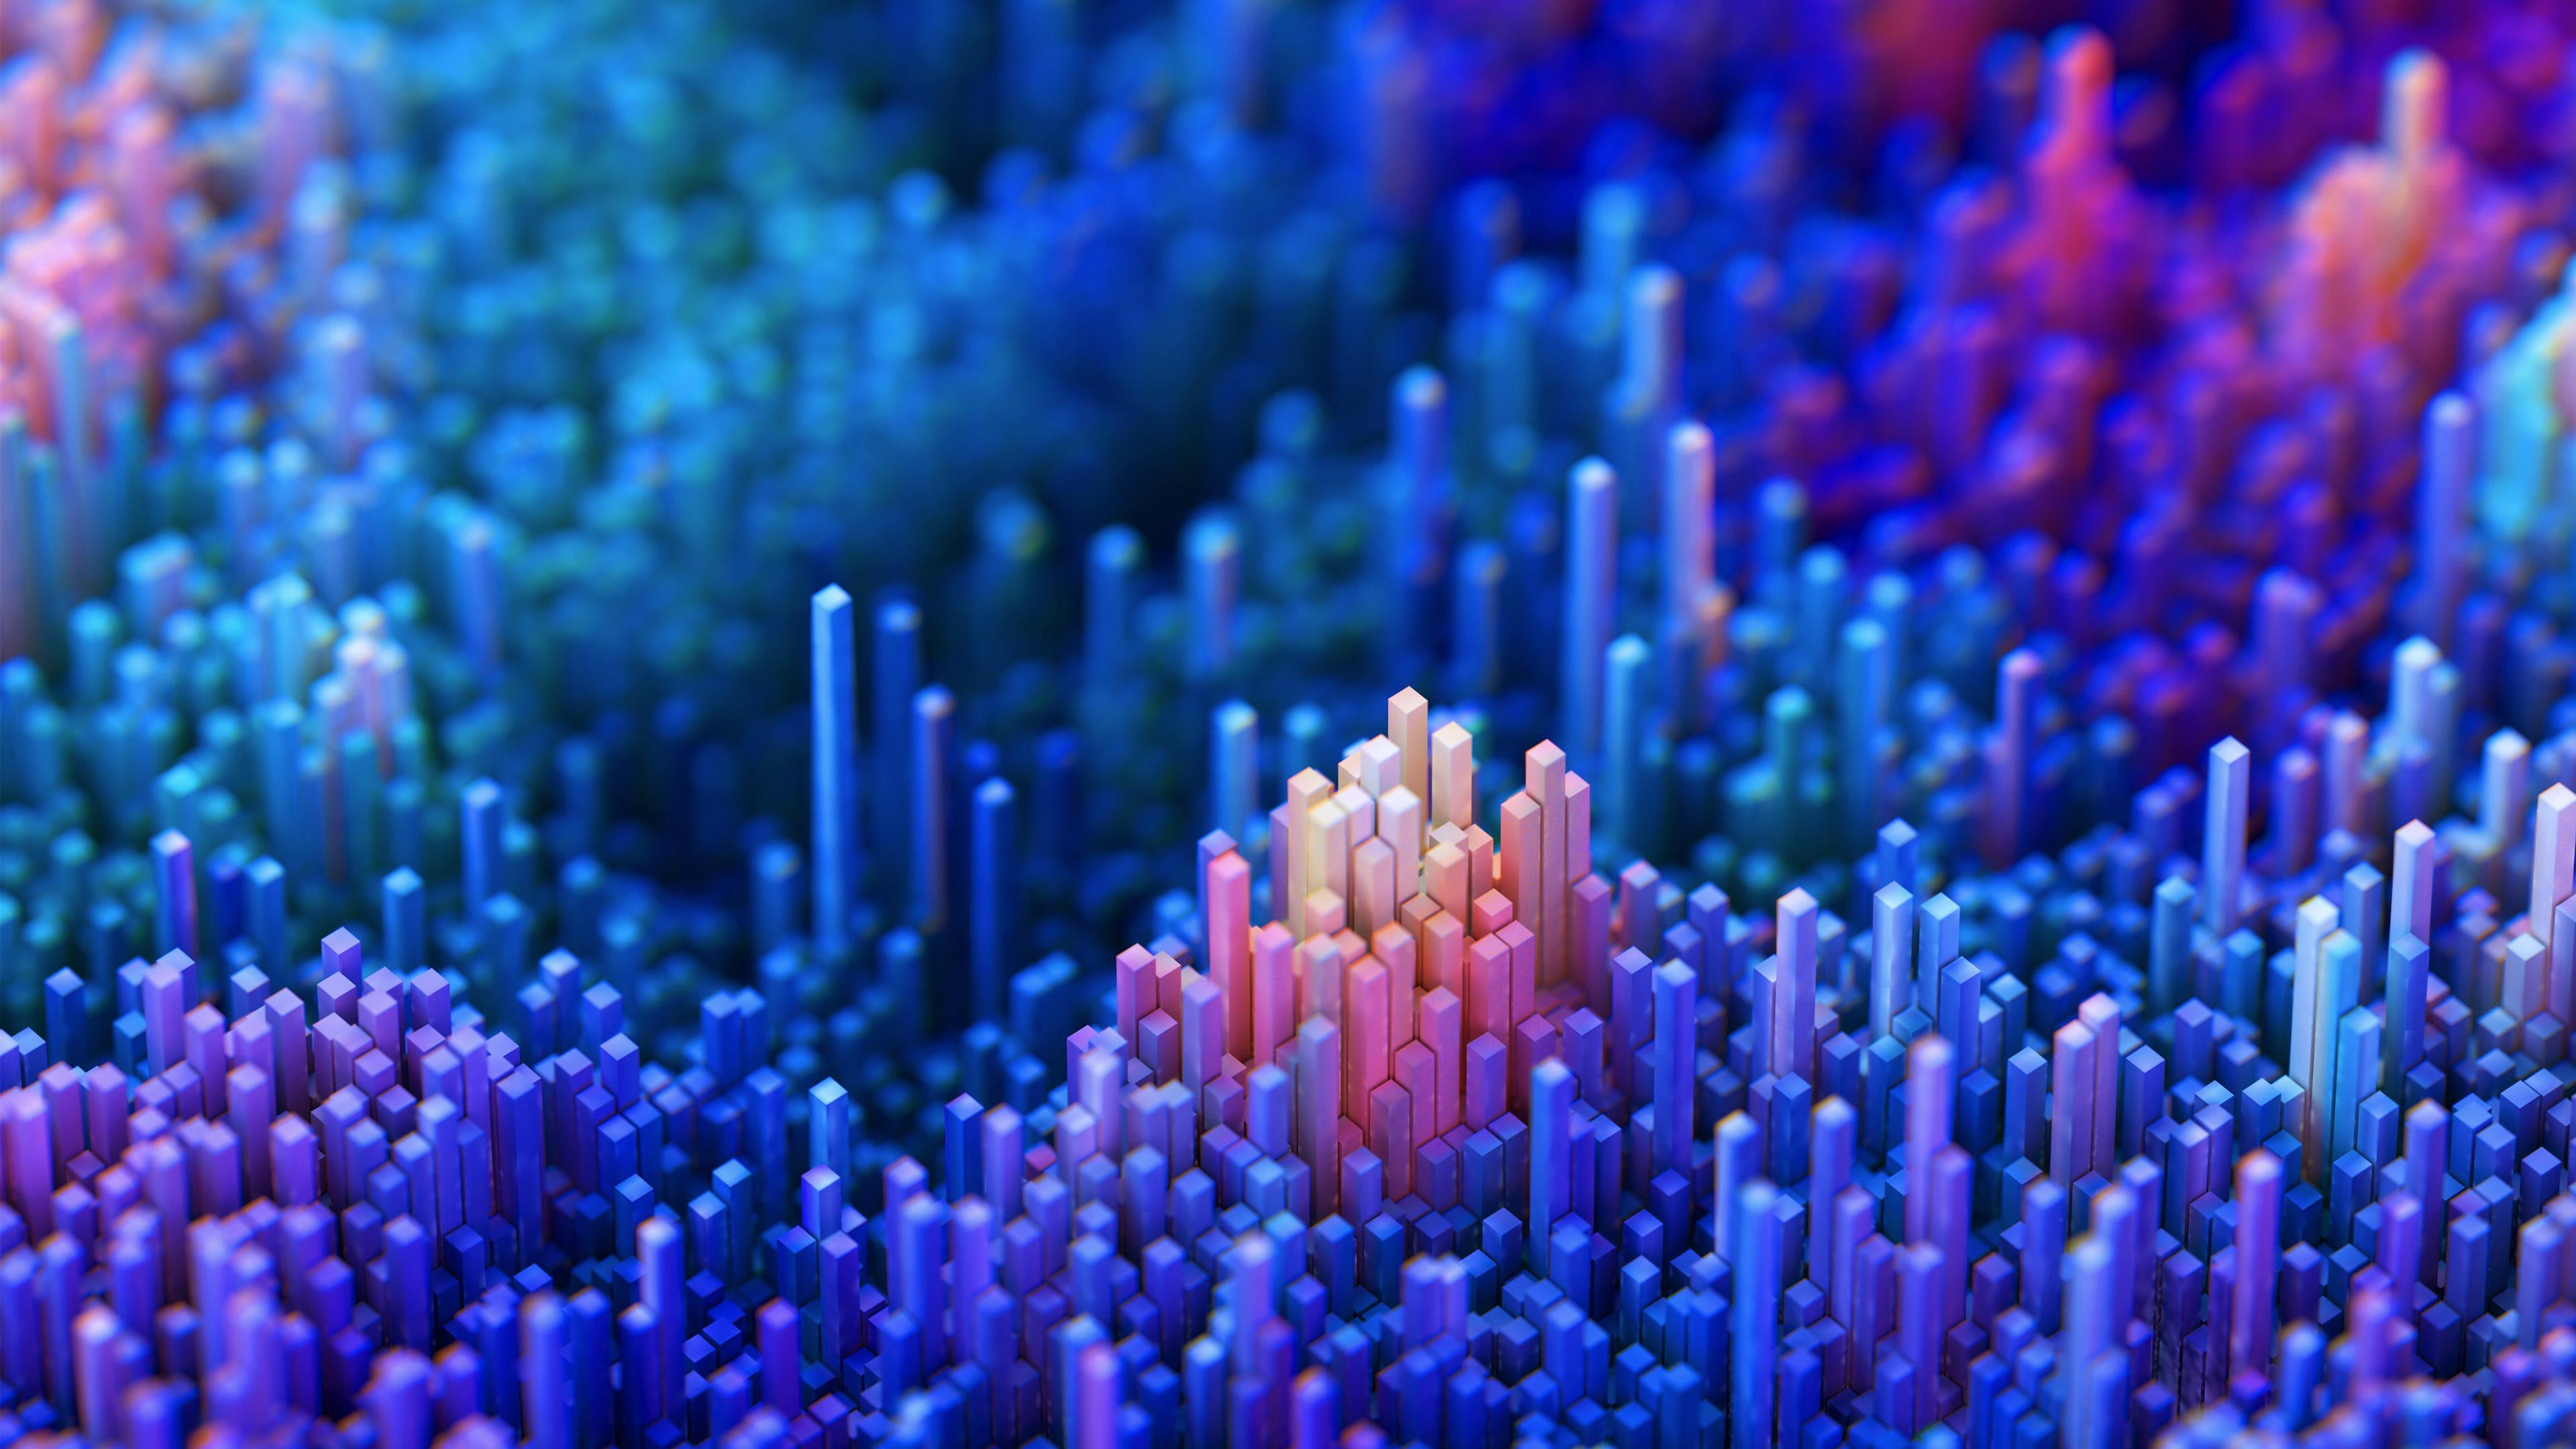 pink and blue corals, abstract, 3D, cyan, backgrounds, technology